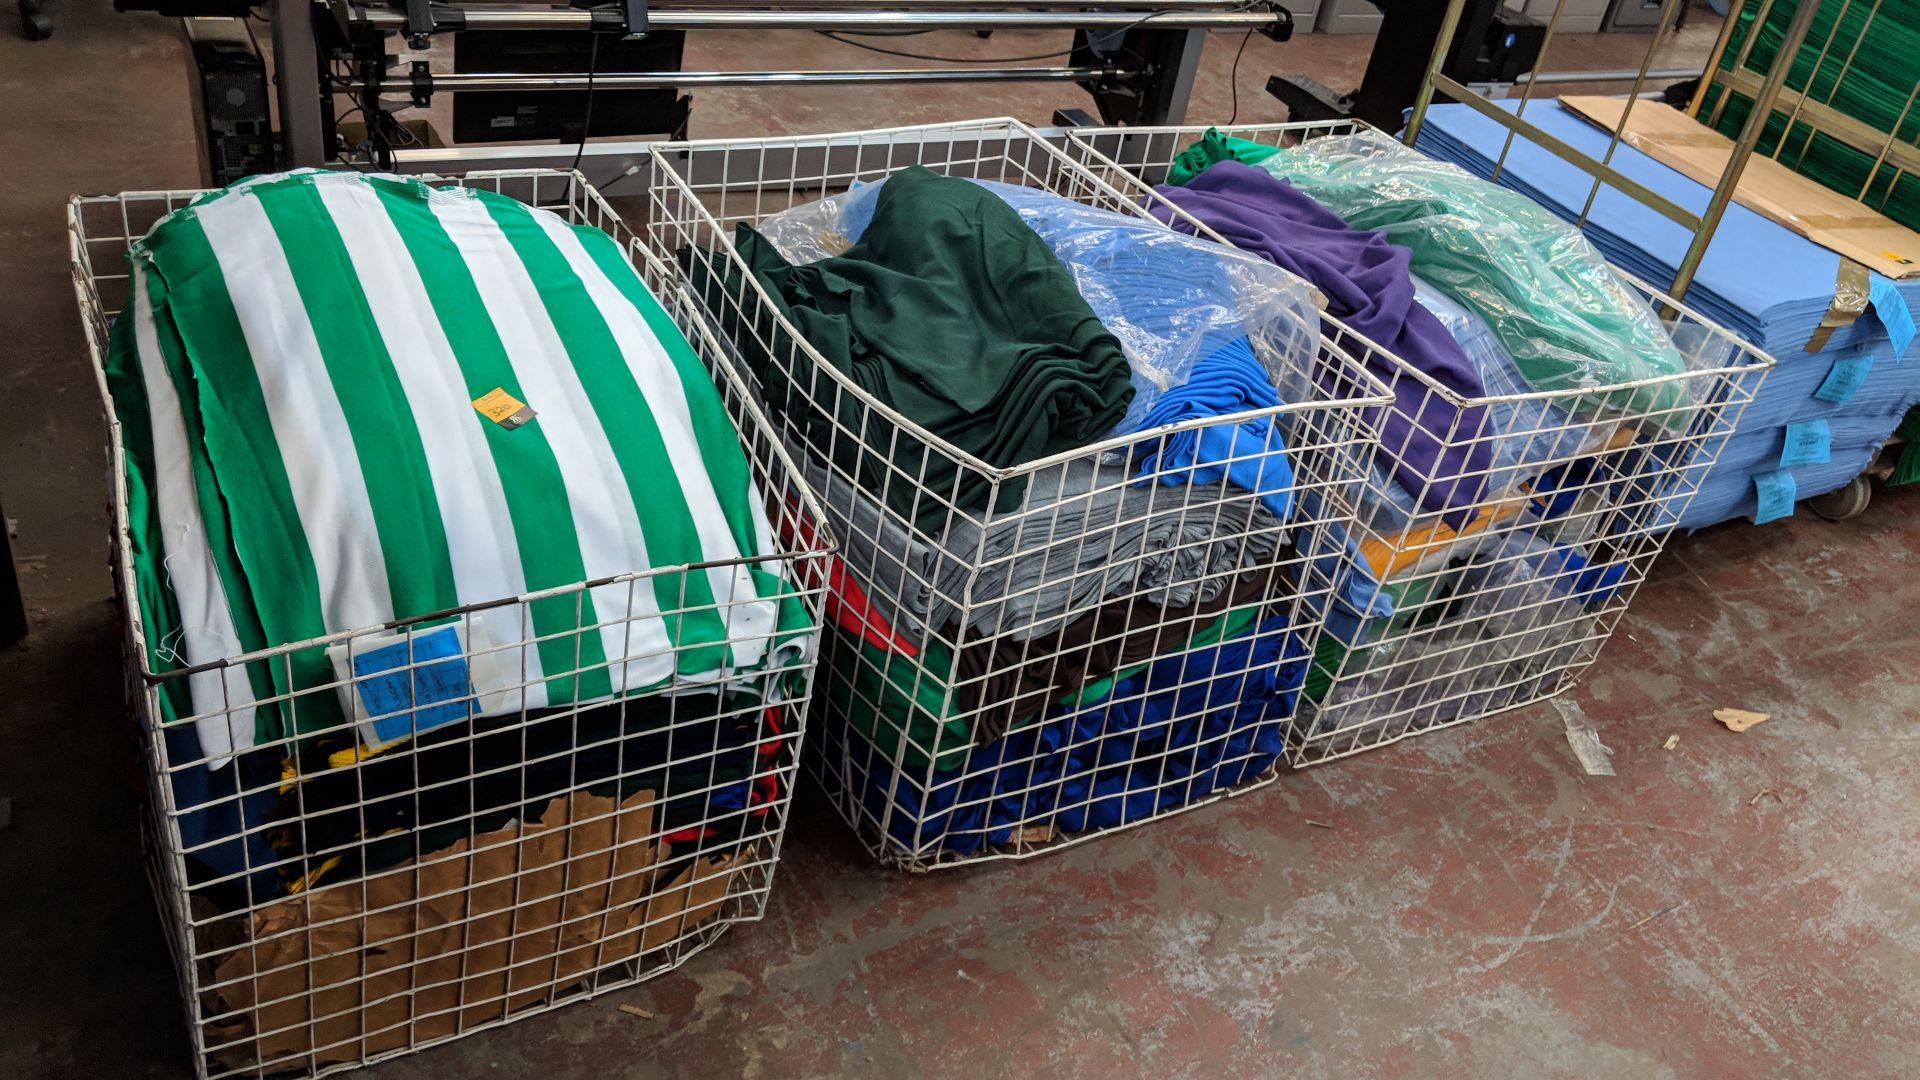 Contents of 3 cages of assorted knitted fabrics